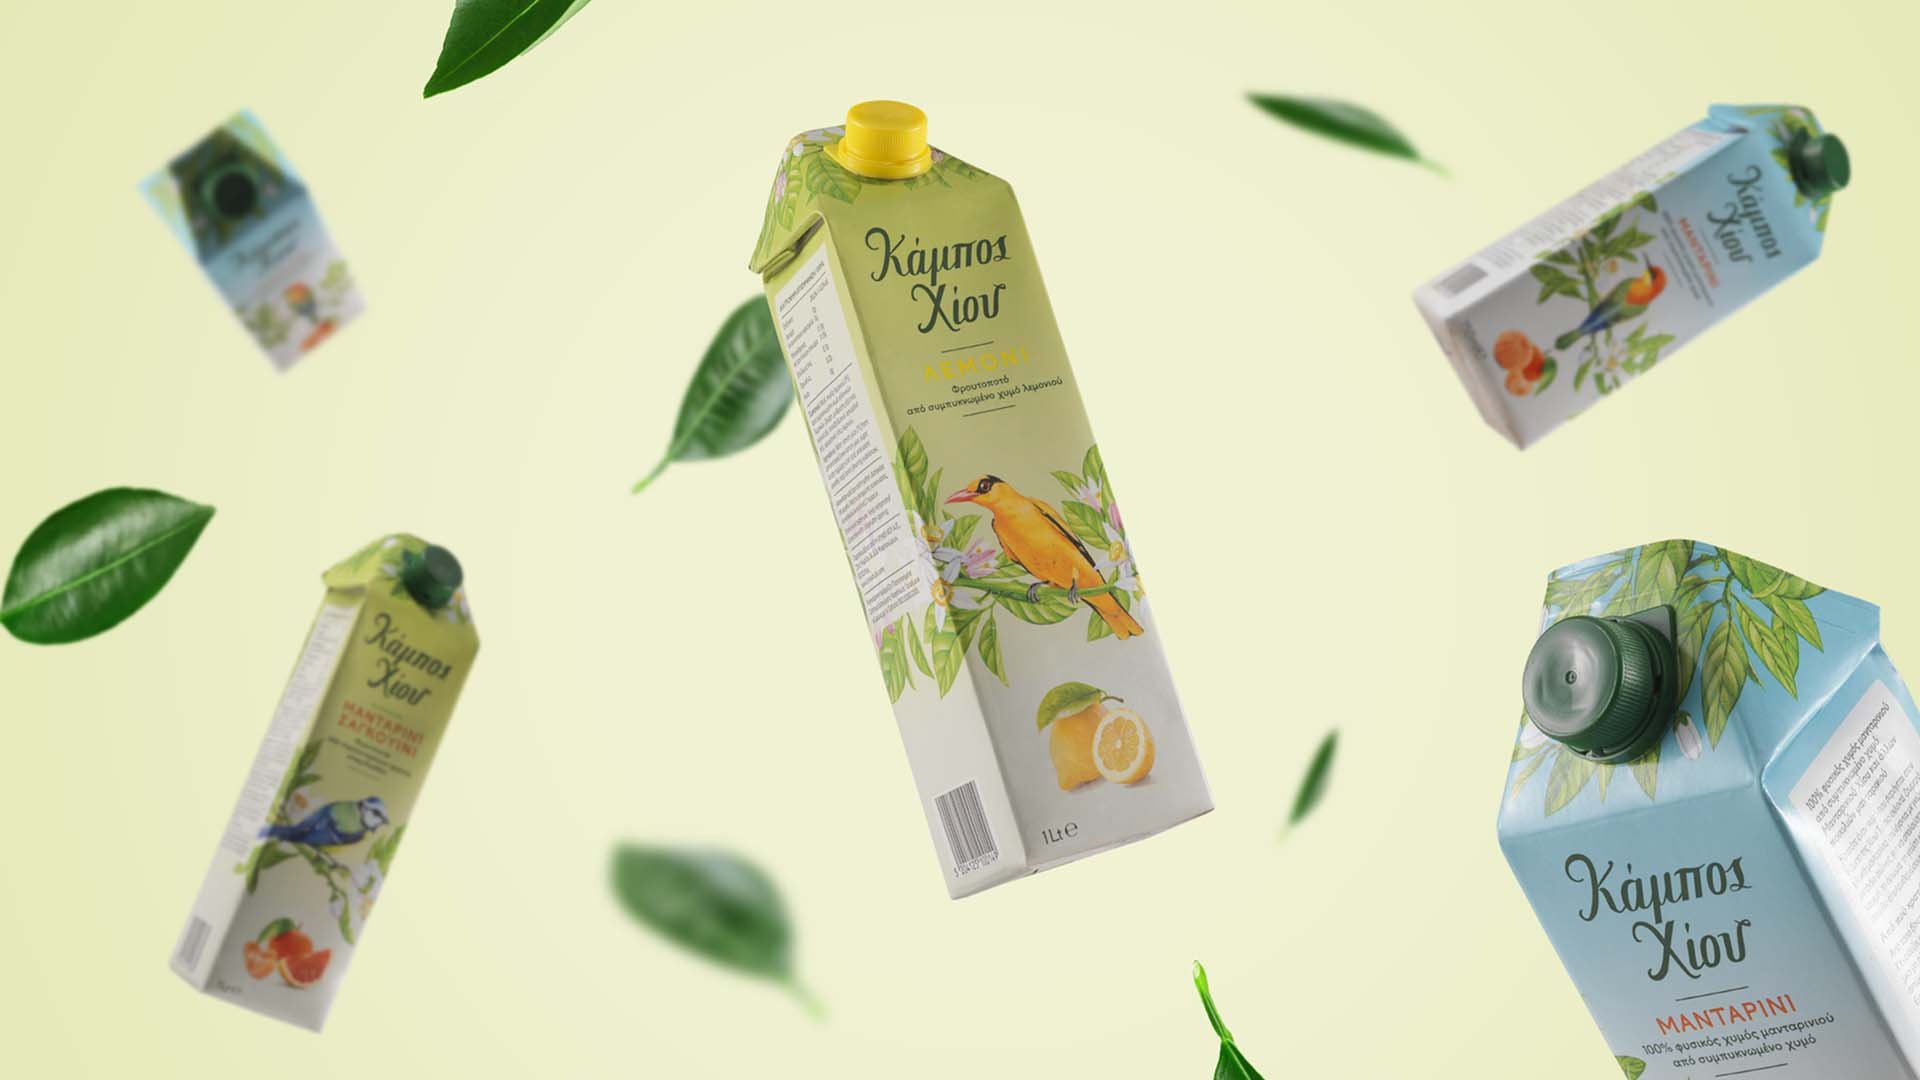 Chios Gardens juices and fruit drinks rebranding on Tetra Pak containers floating around tree leaves